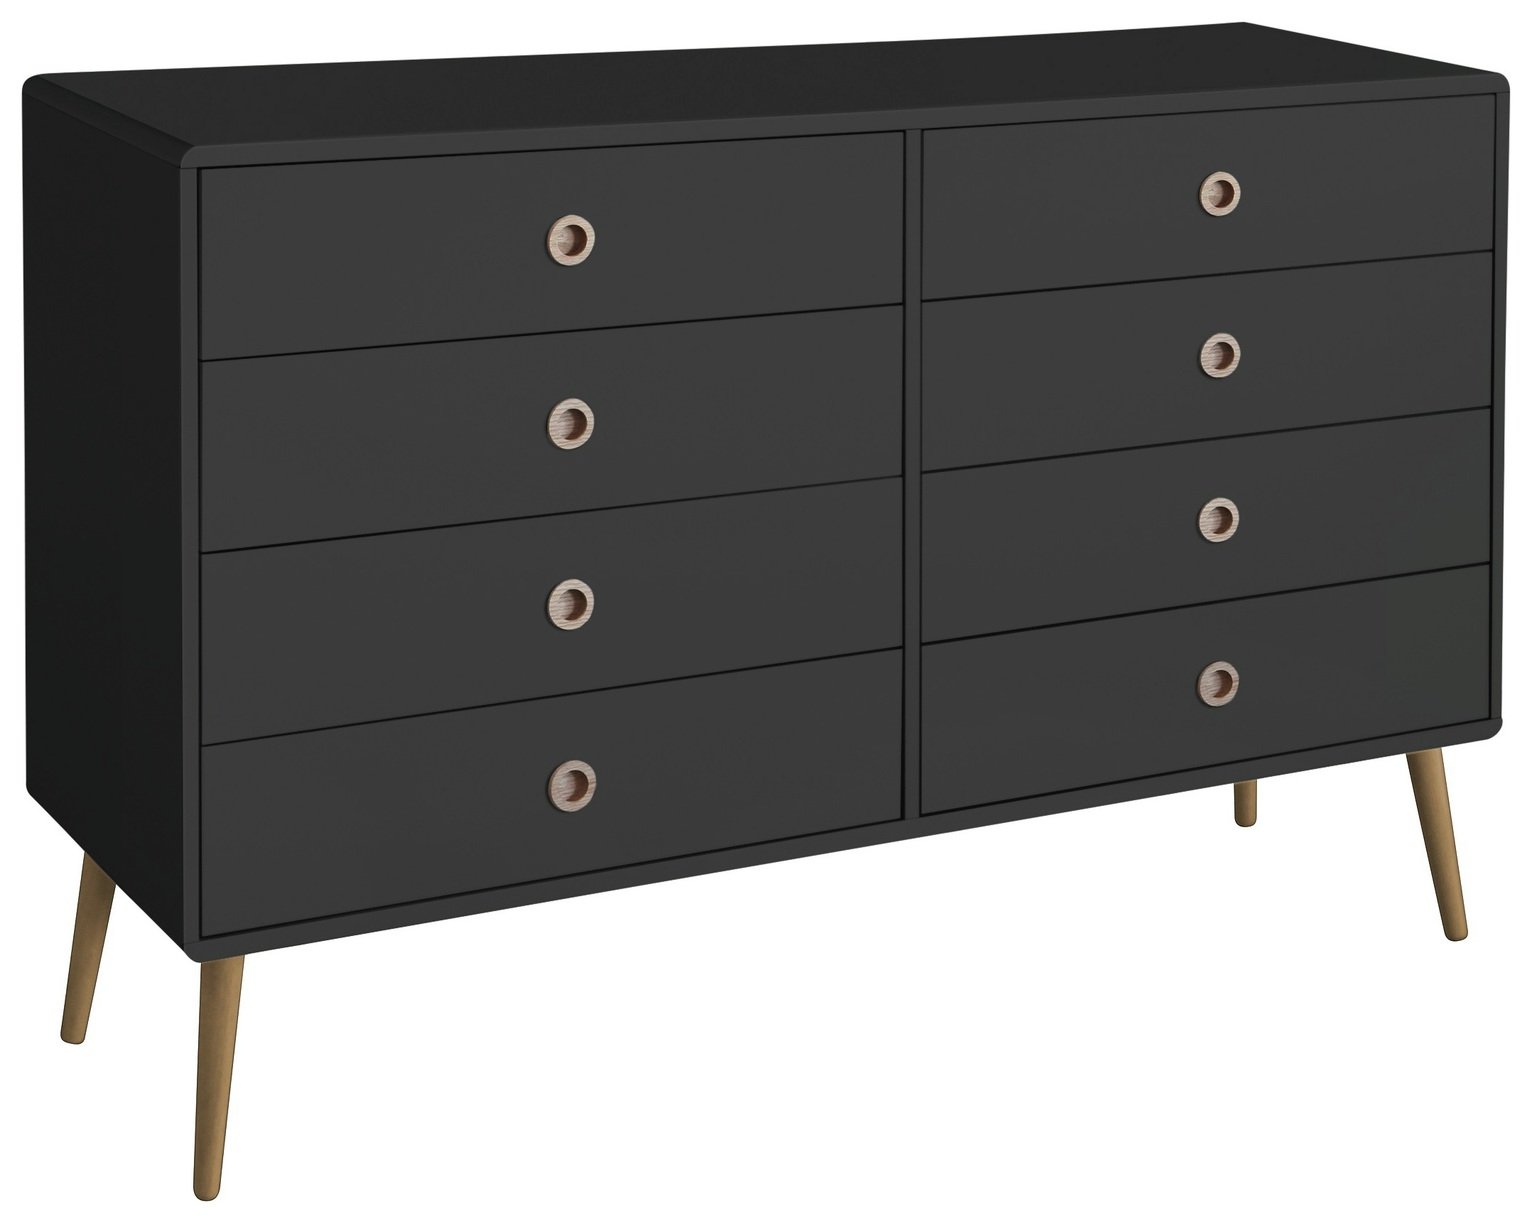 Softline 4 Plus 4 Drawer Chest review